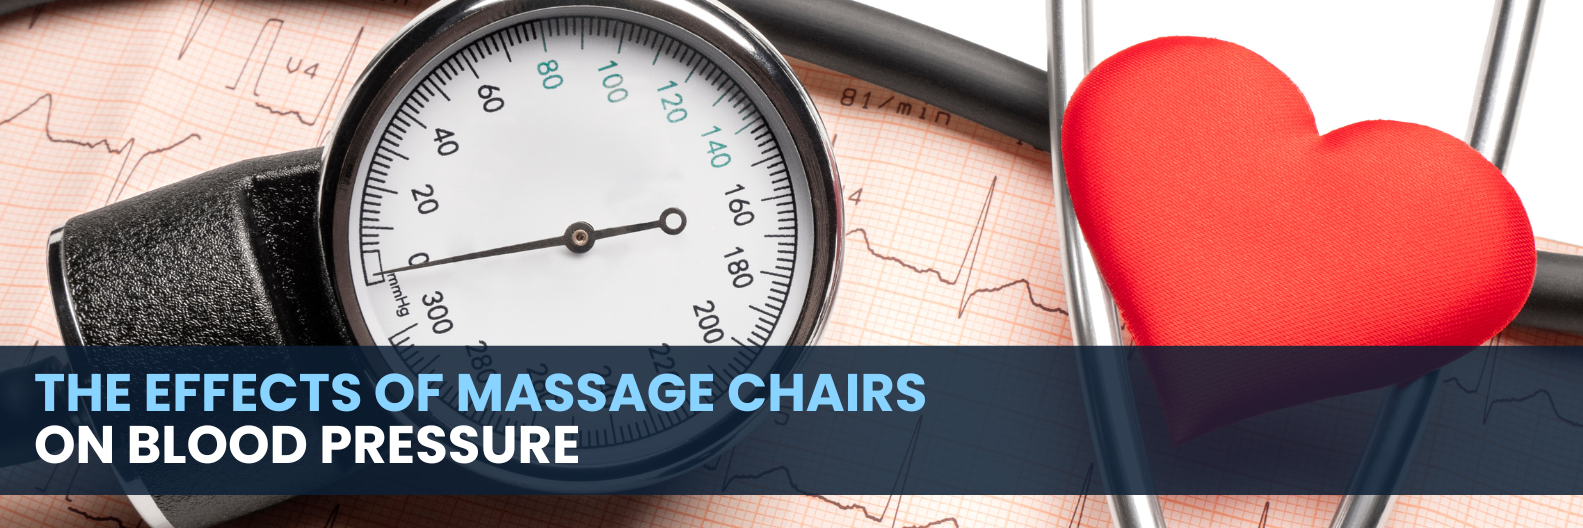 Explore how massage chairs affect blood pressure and circulation. Delve into health considerations and benefits aimed at enhancing overall well-being.